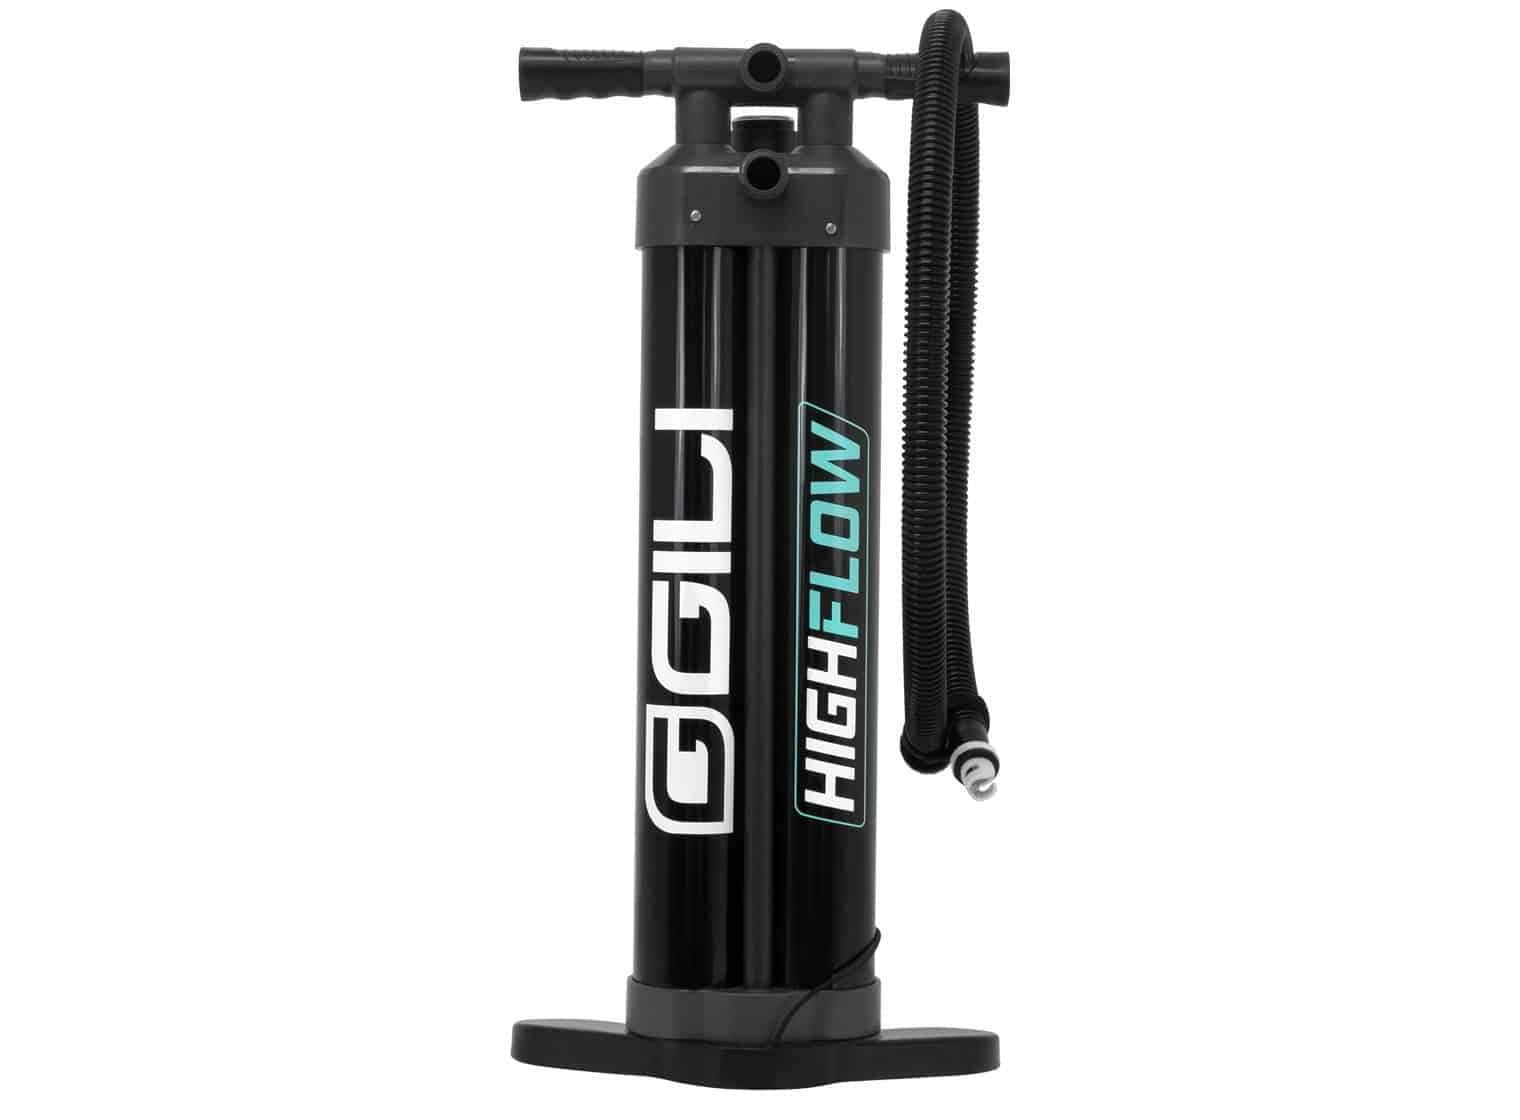 GILI triple action hand pump for paddle board